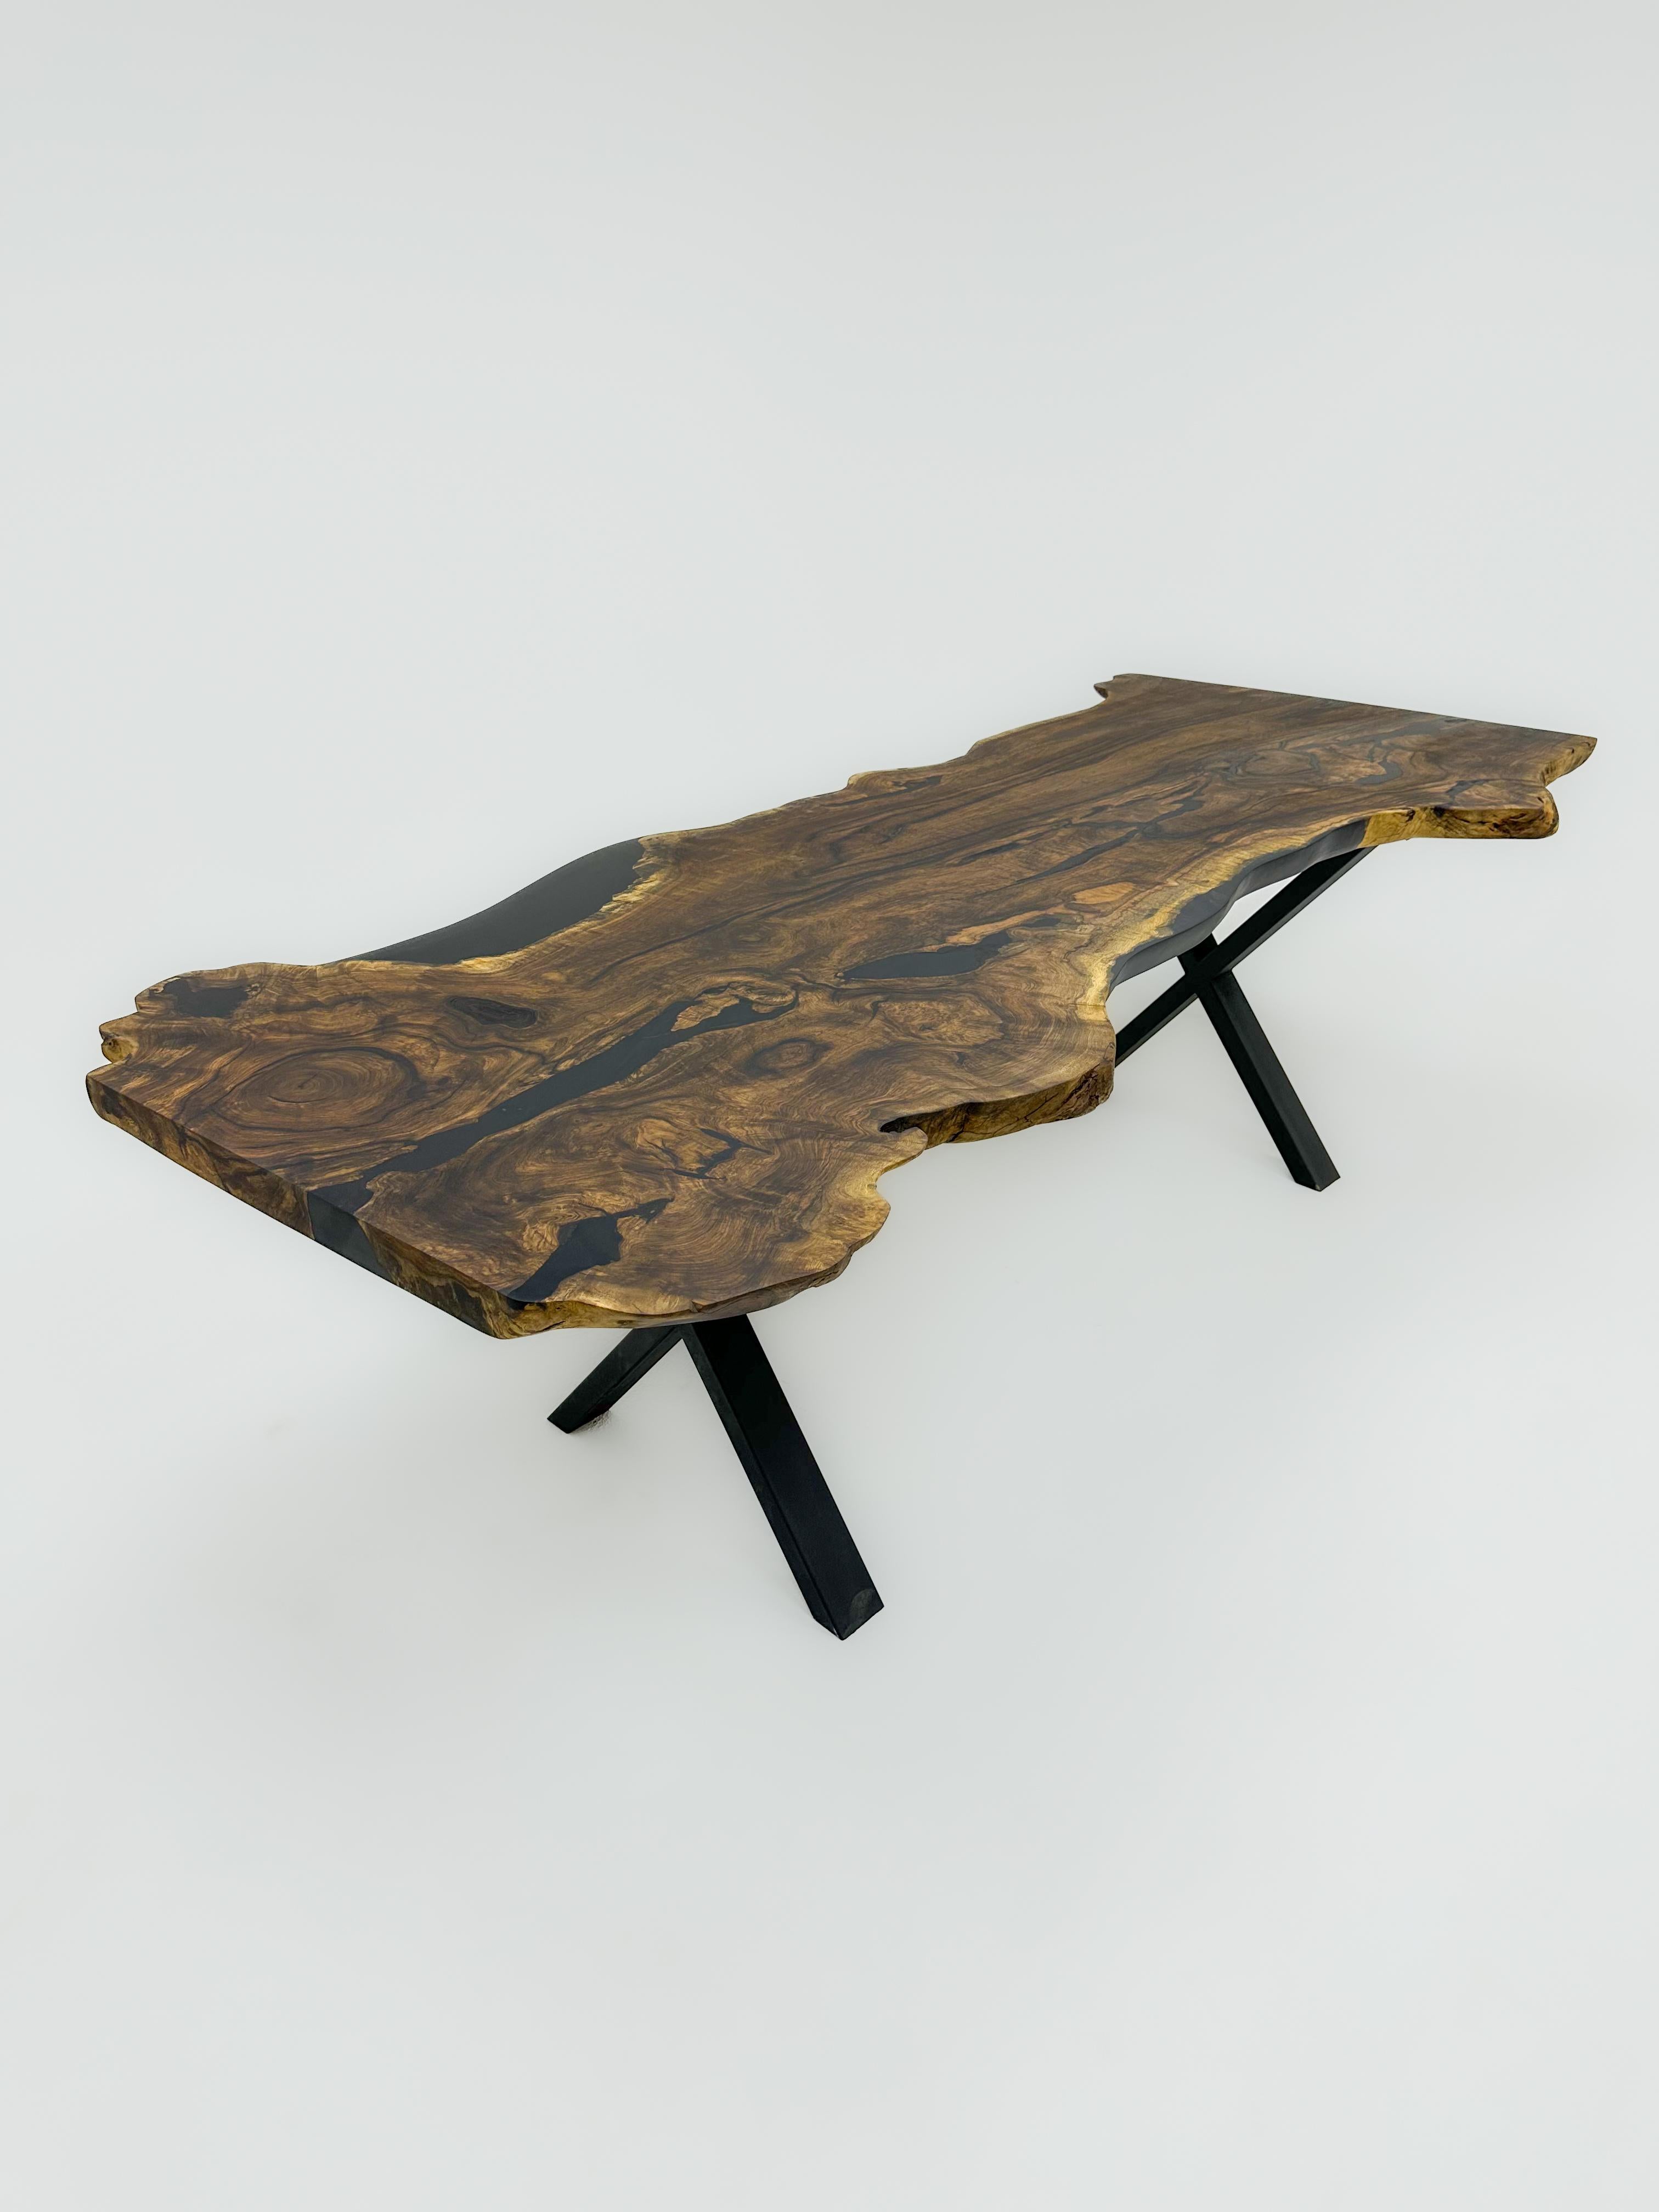 Massive One Piece Slab Live Edge Walnut Wood Dining Table For Sale 4